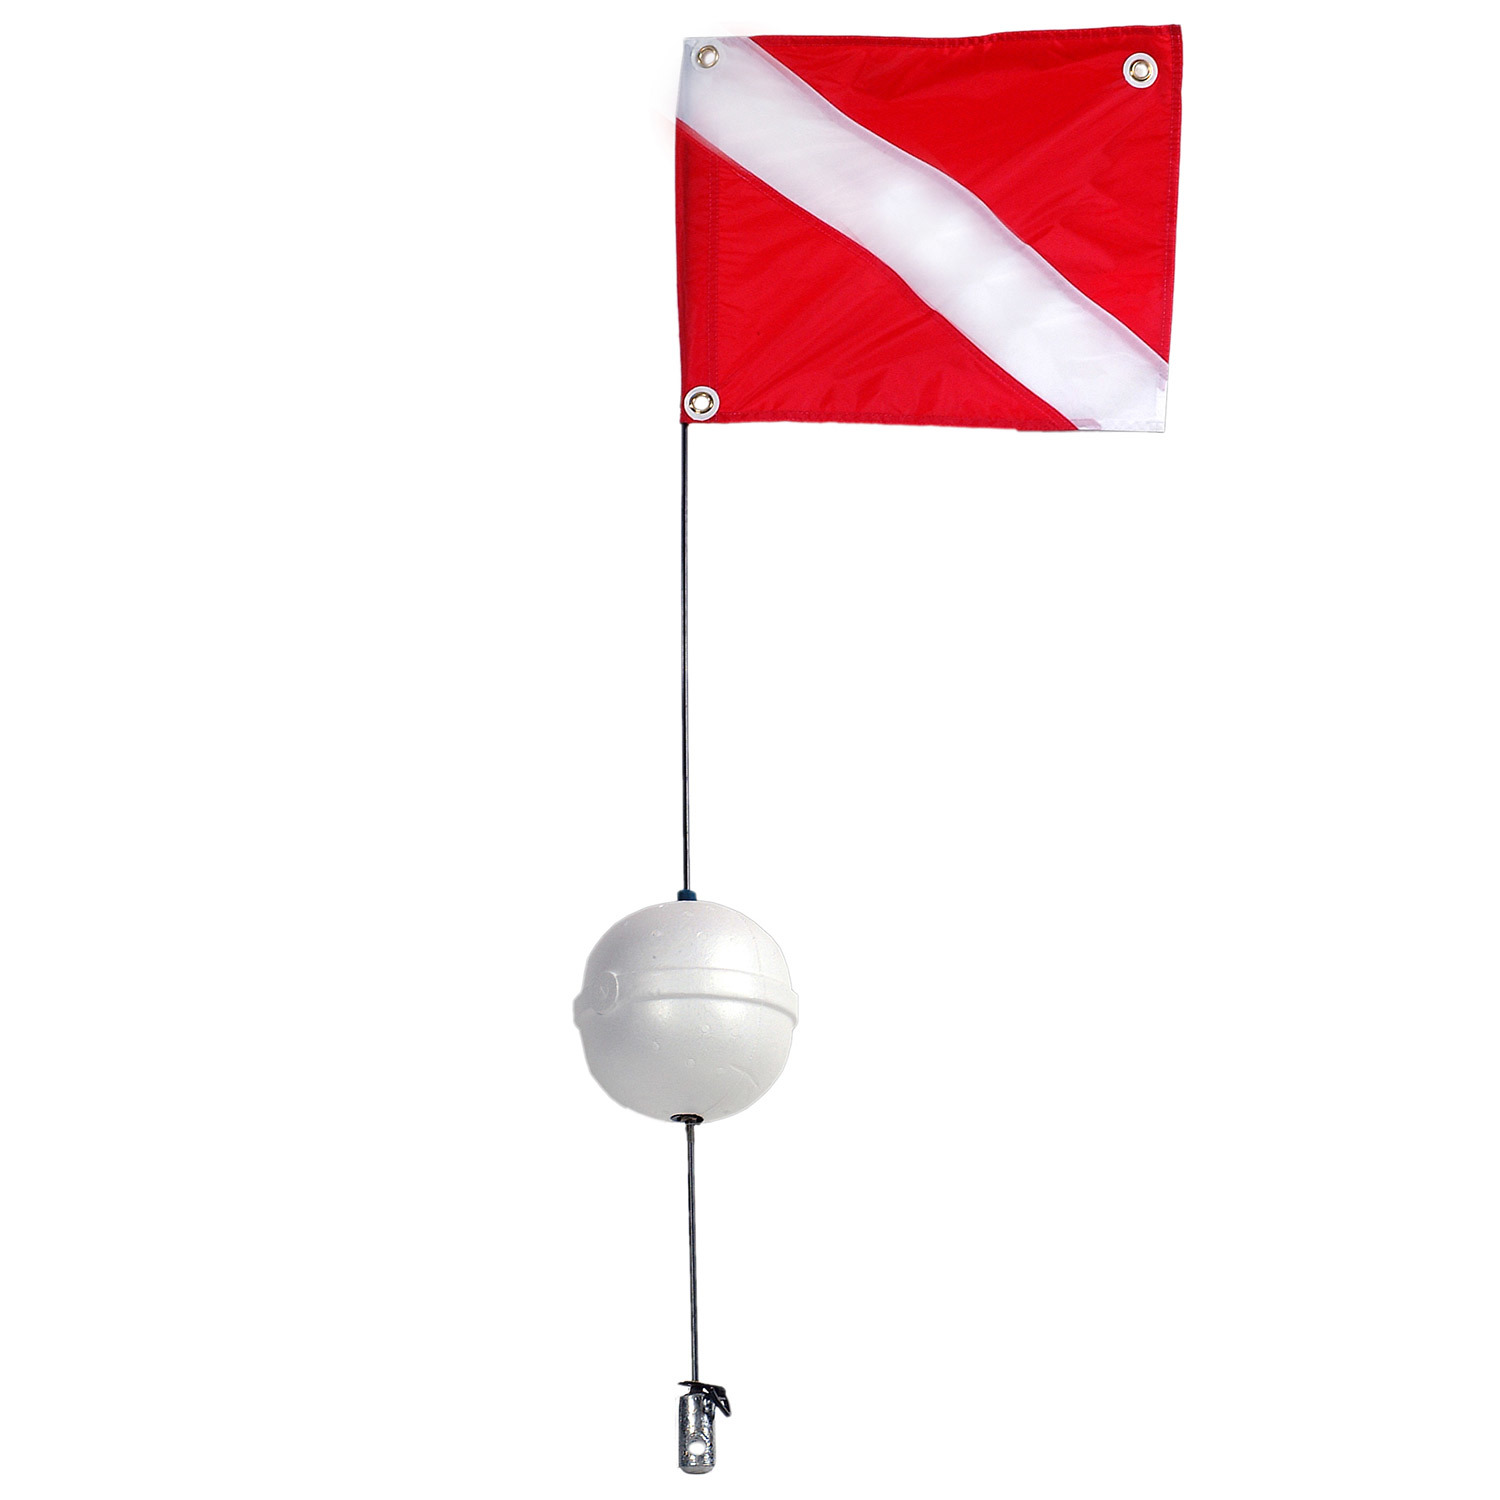 two types of diver down flags